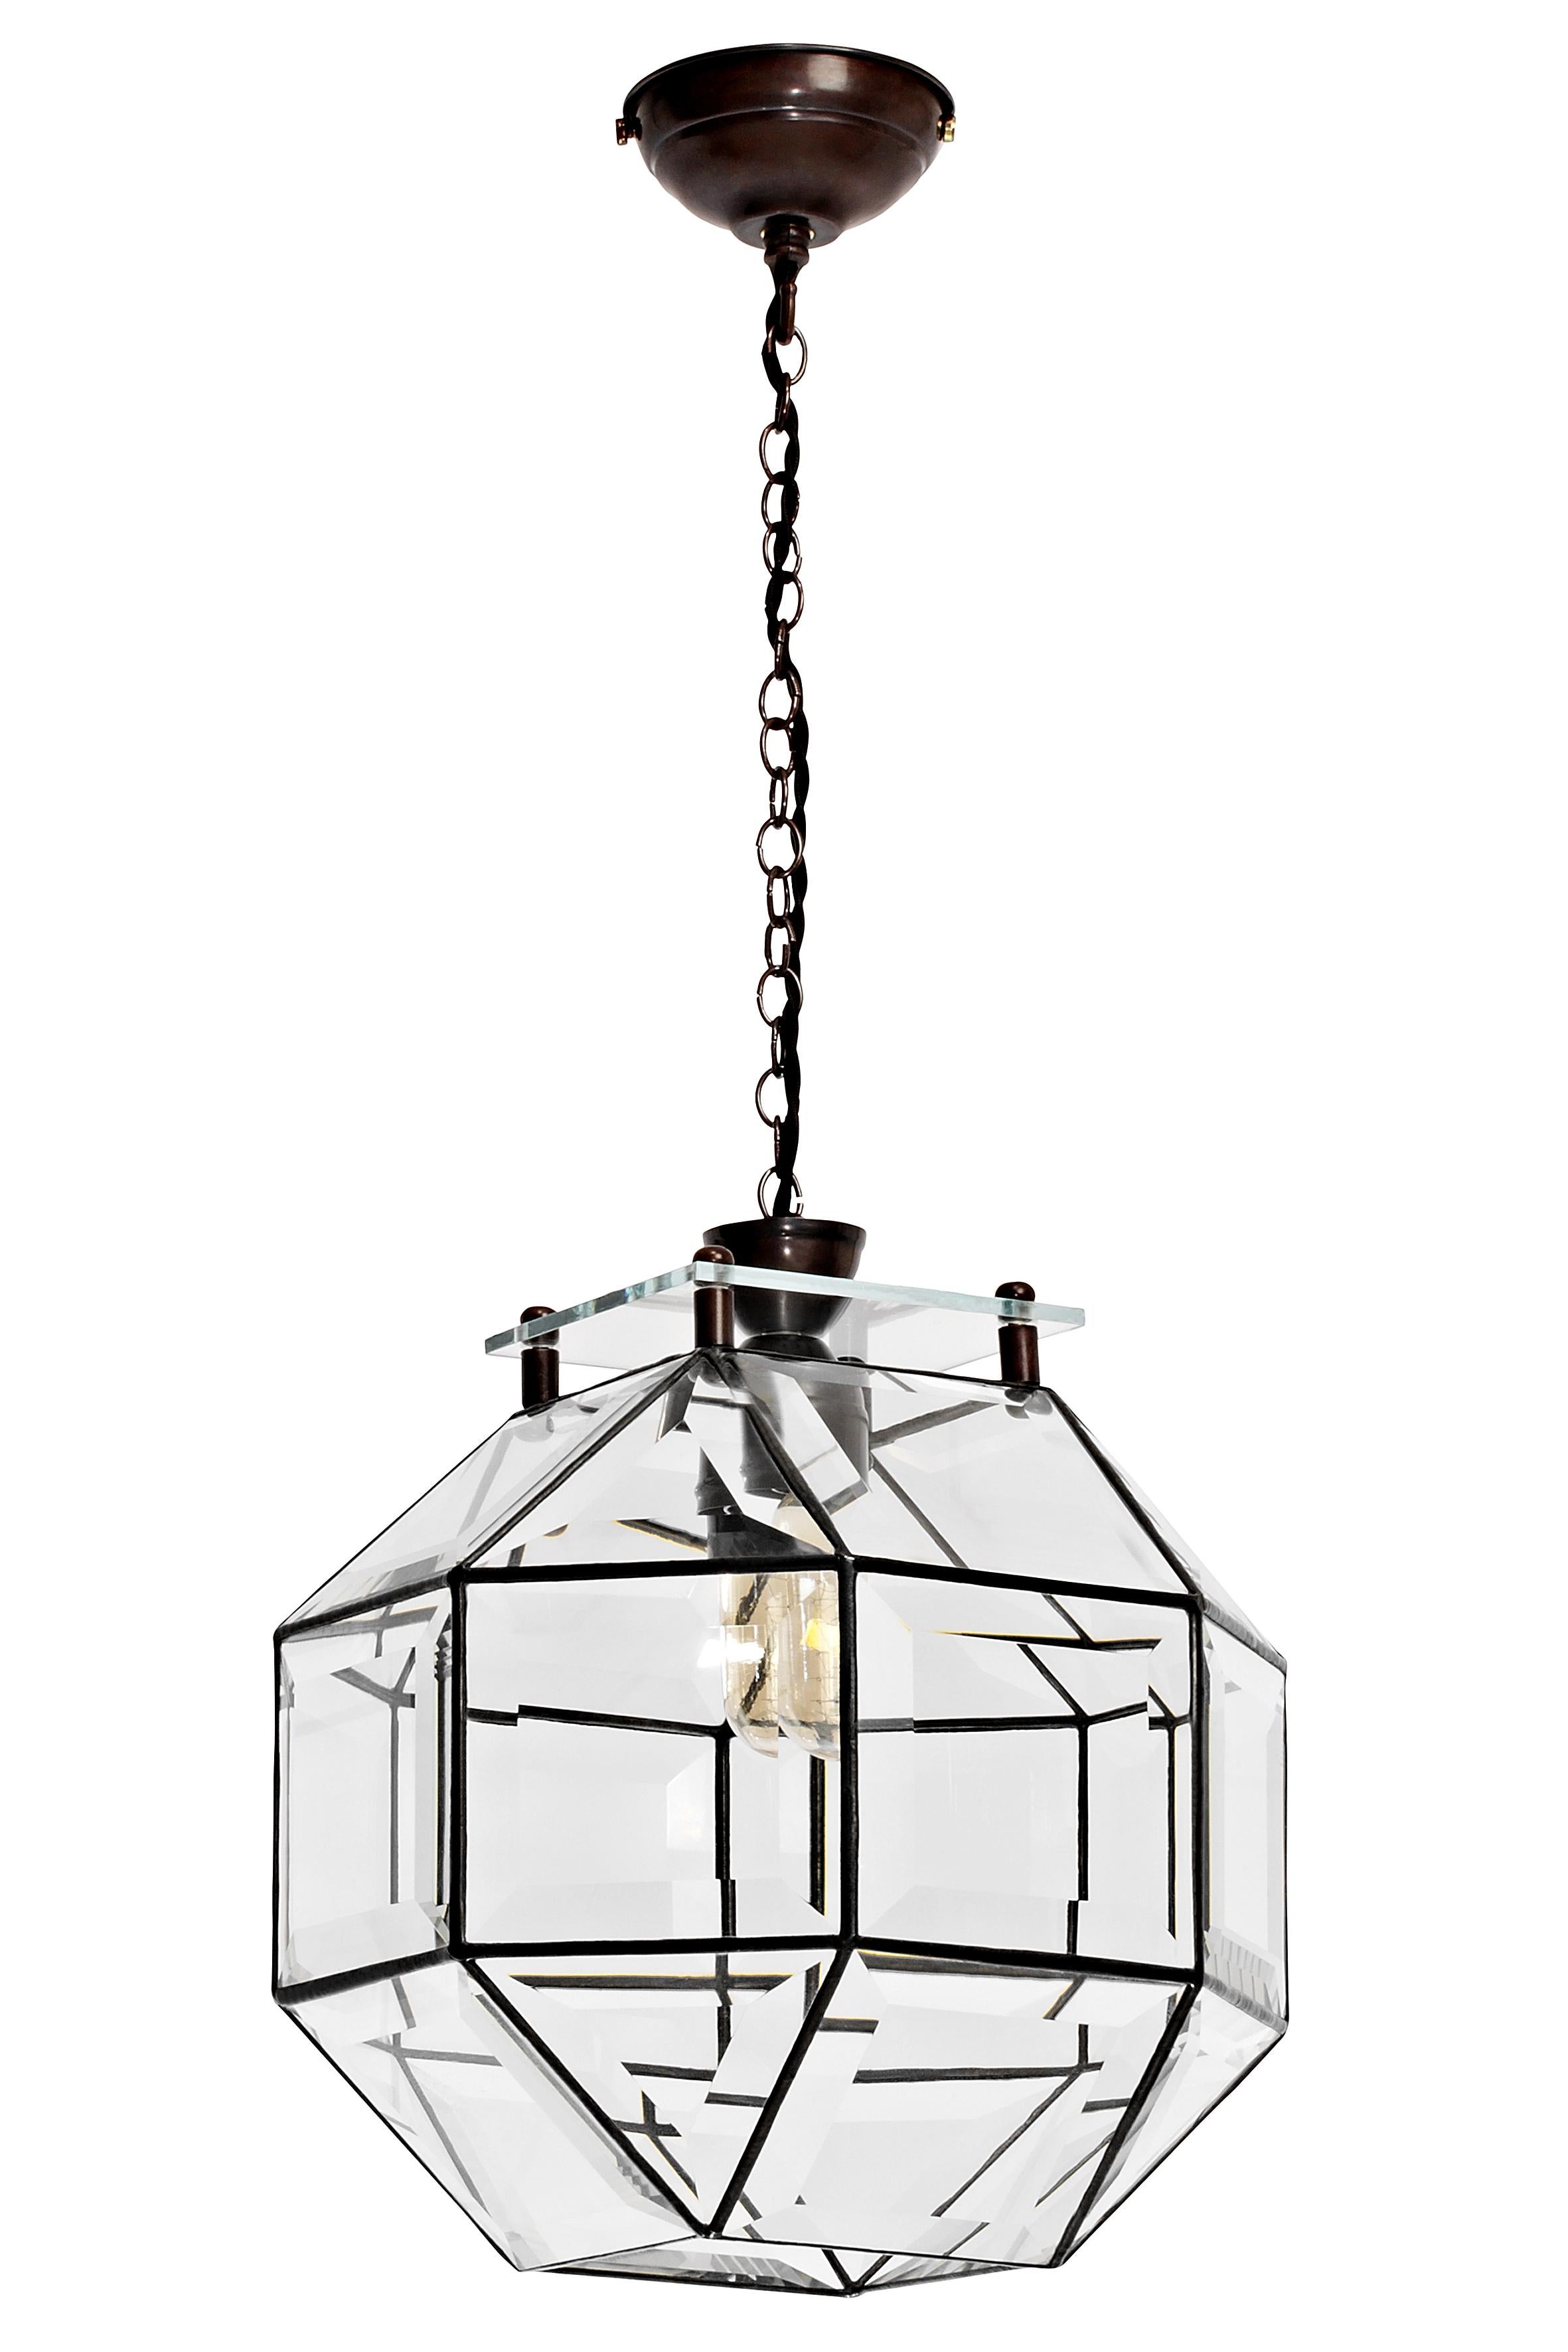 Paragon pendant by CTO Lighting
Materials: bronze with bevelled glass and bronze oval chain
Dimensions: H 30 x W 30 cm 

All our lamps can be wired according to each country. If sold to the USA it will be wired for the USA for instance.
Other sizes